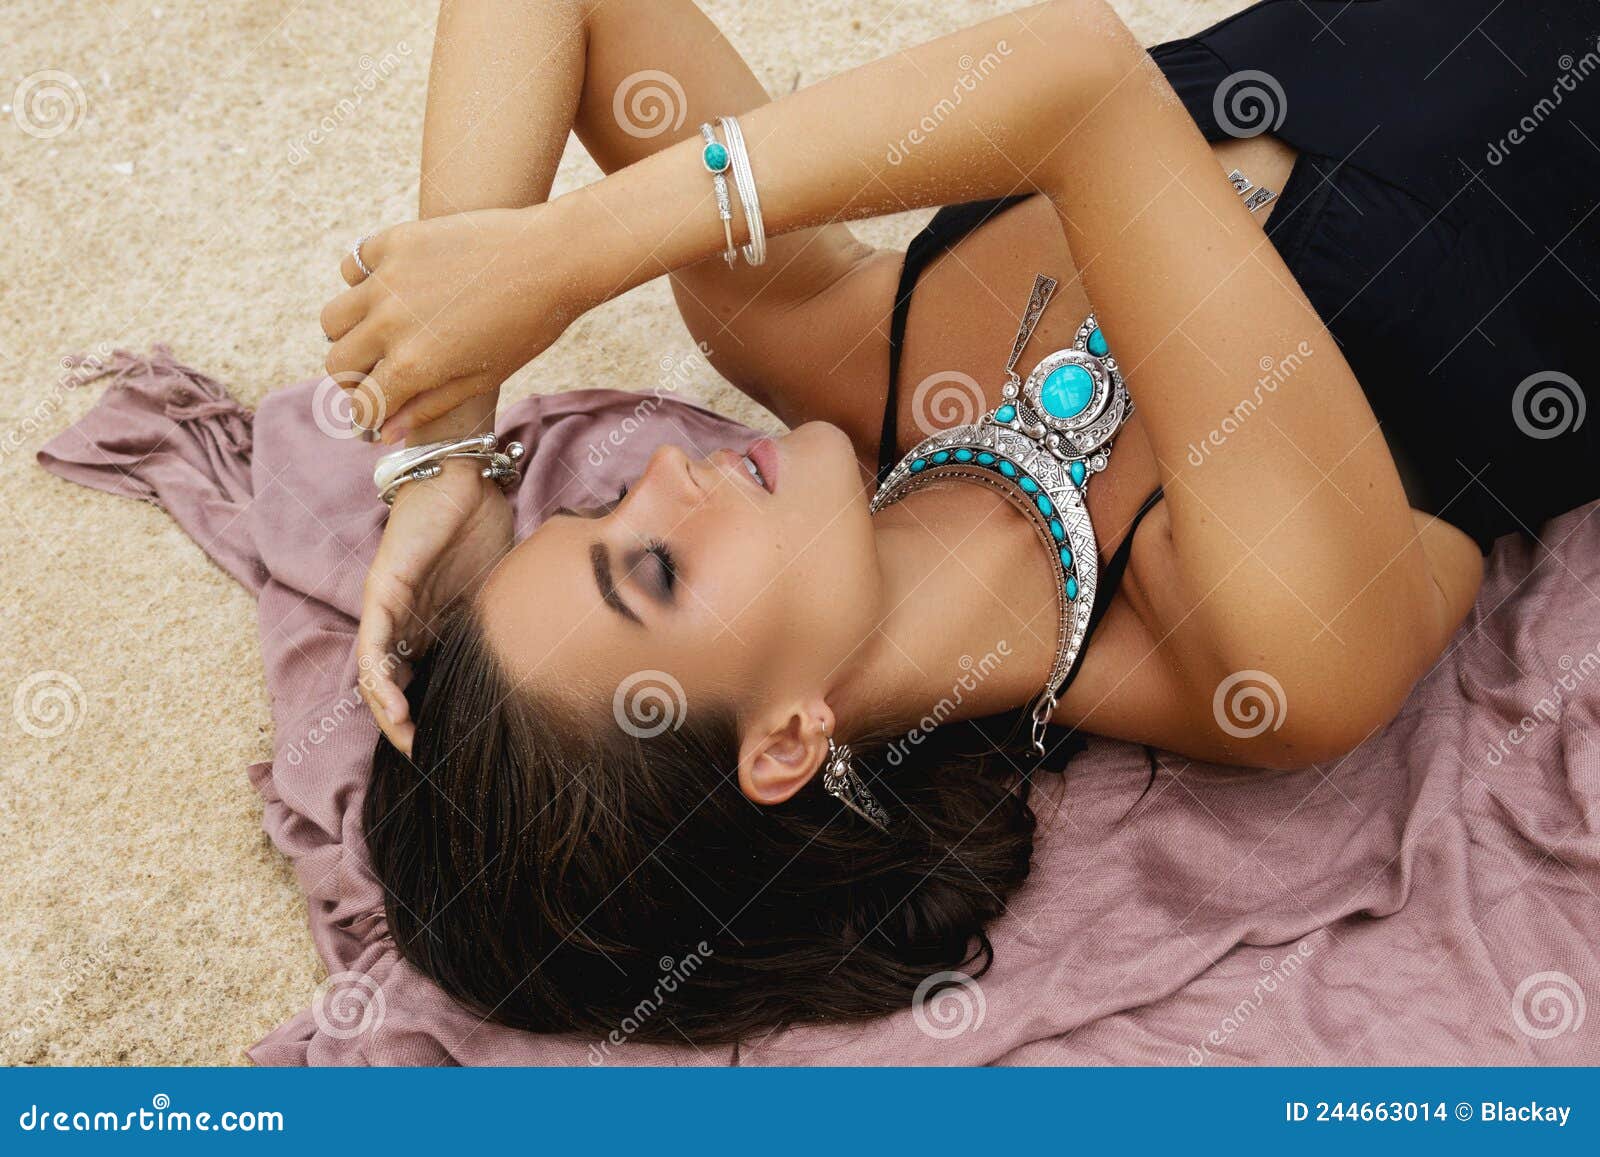 Woman Wearing Silver Jewelry on the Beach Stock Photo